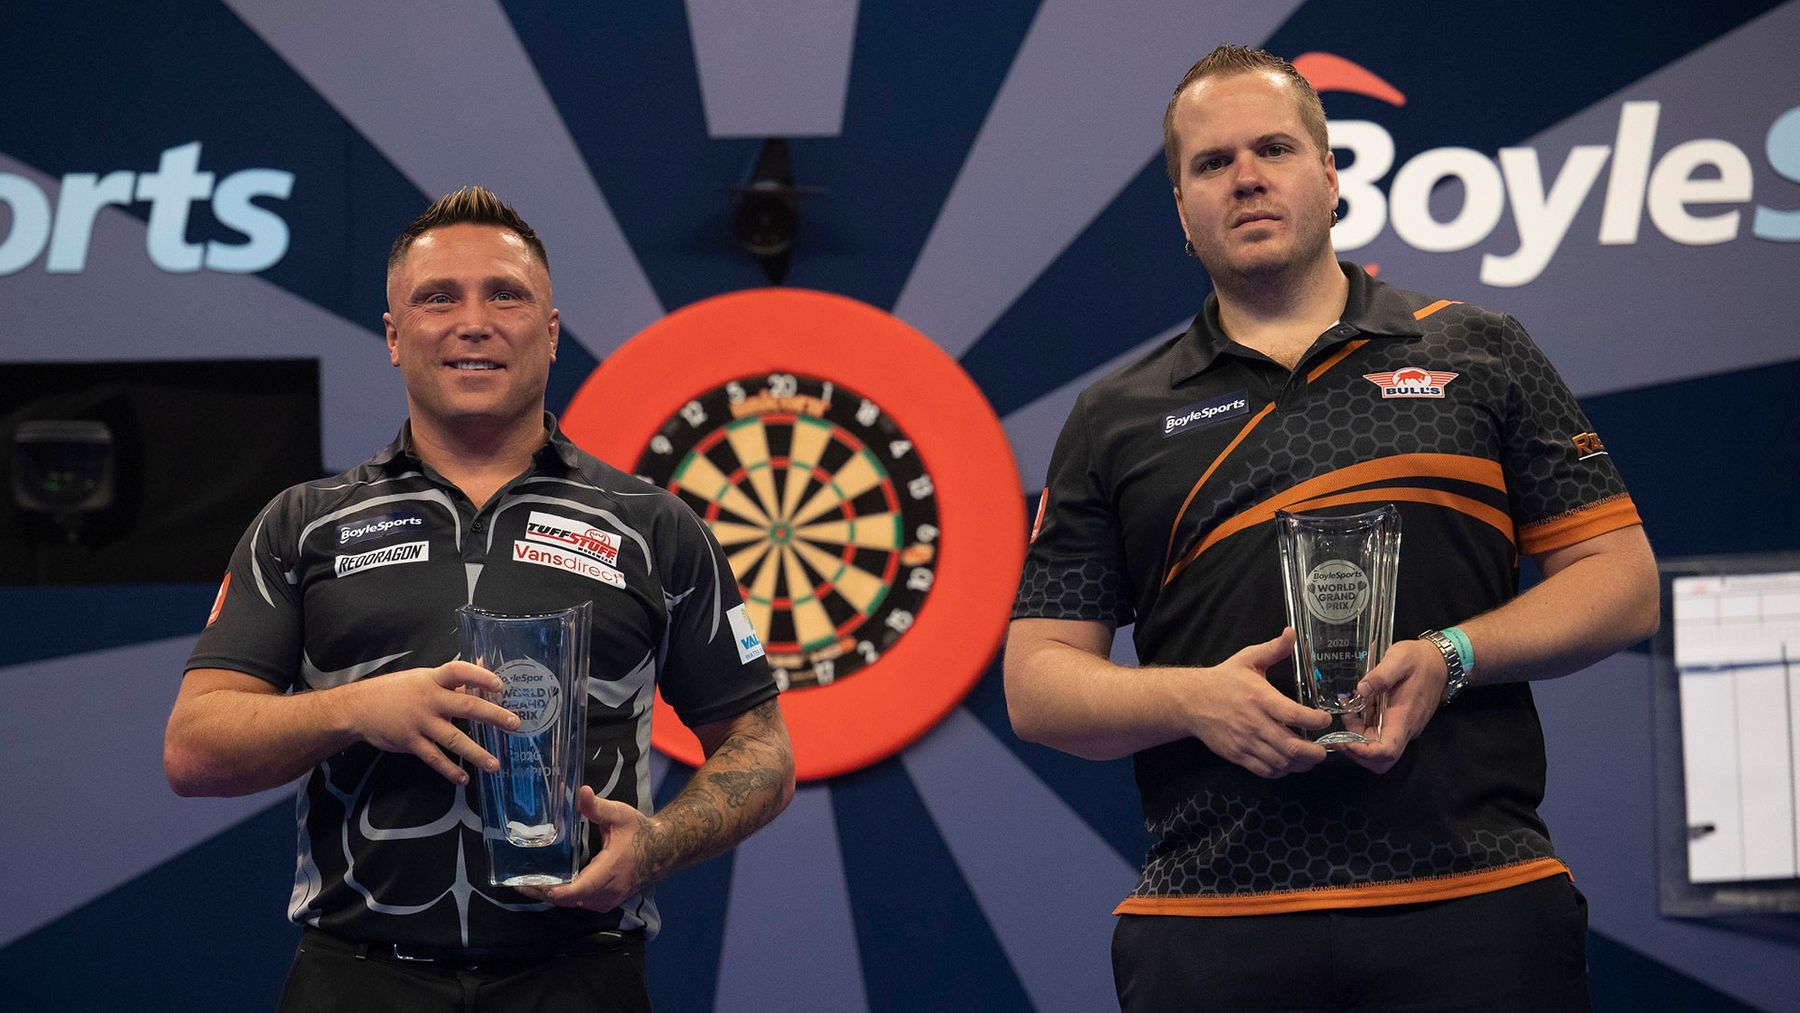 World Grand Prix darts 2020 Draw, schedule, betting odds, results and live Sky Sports TV coverage details